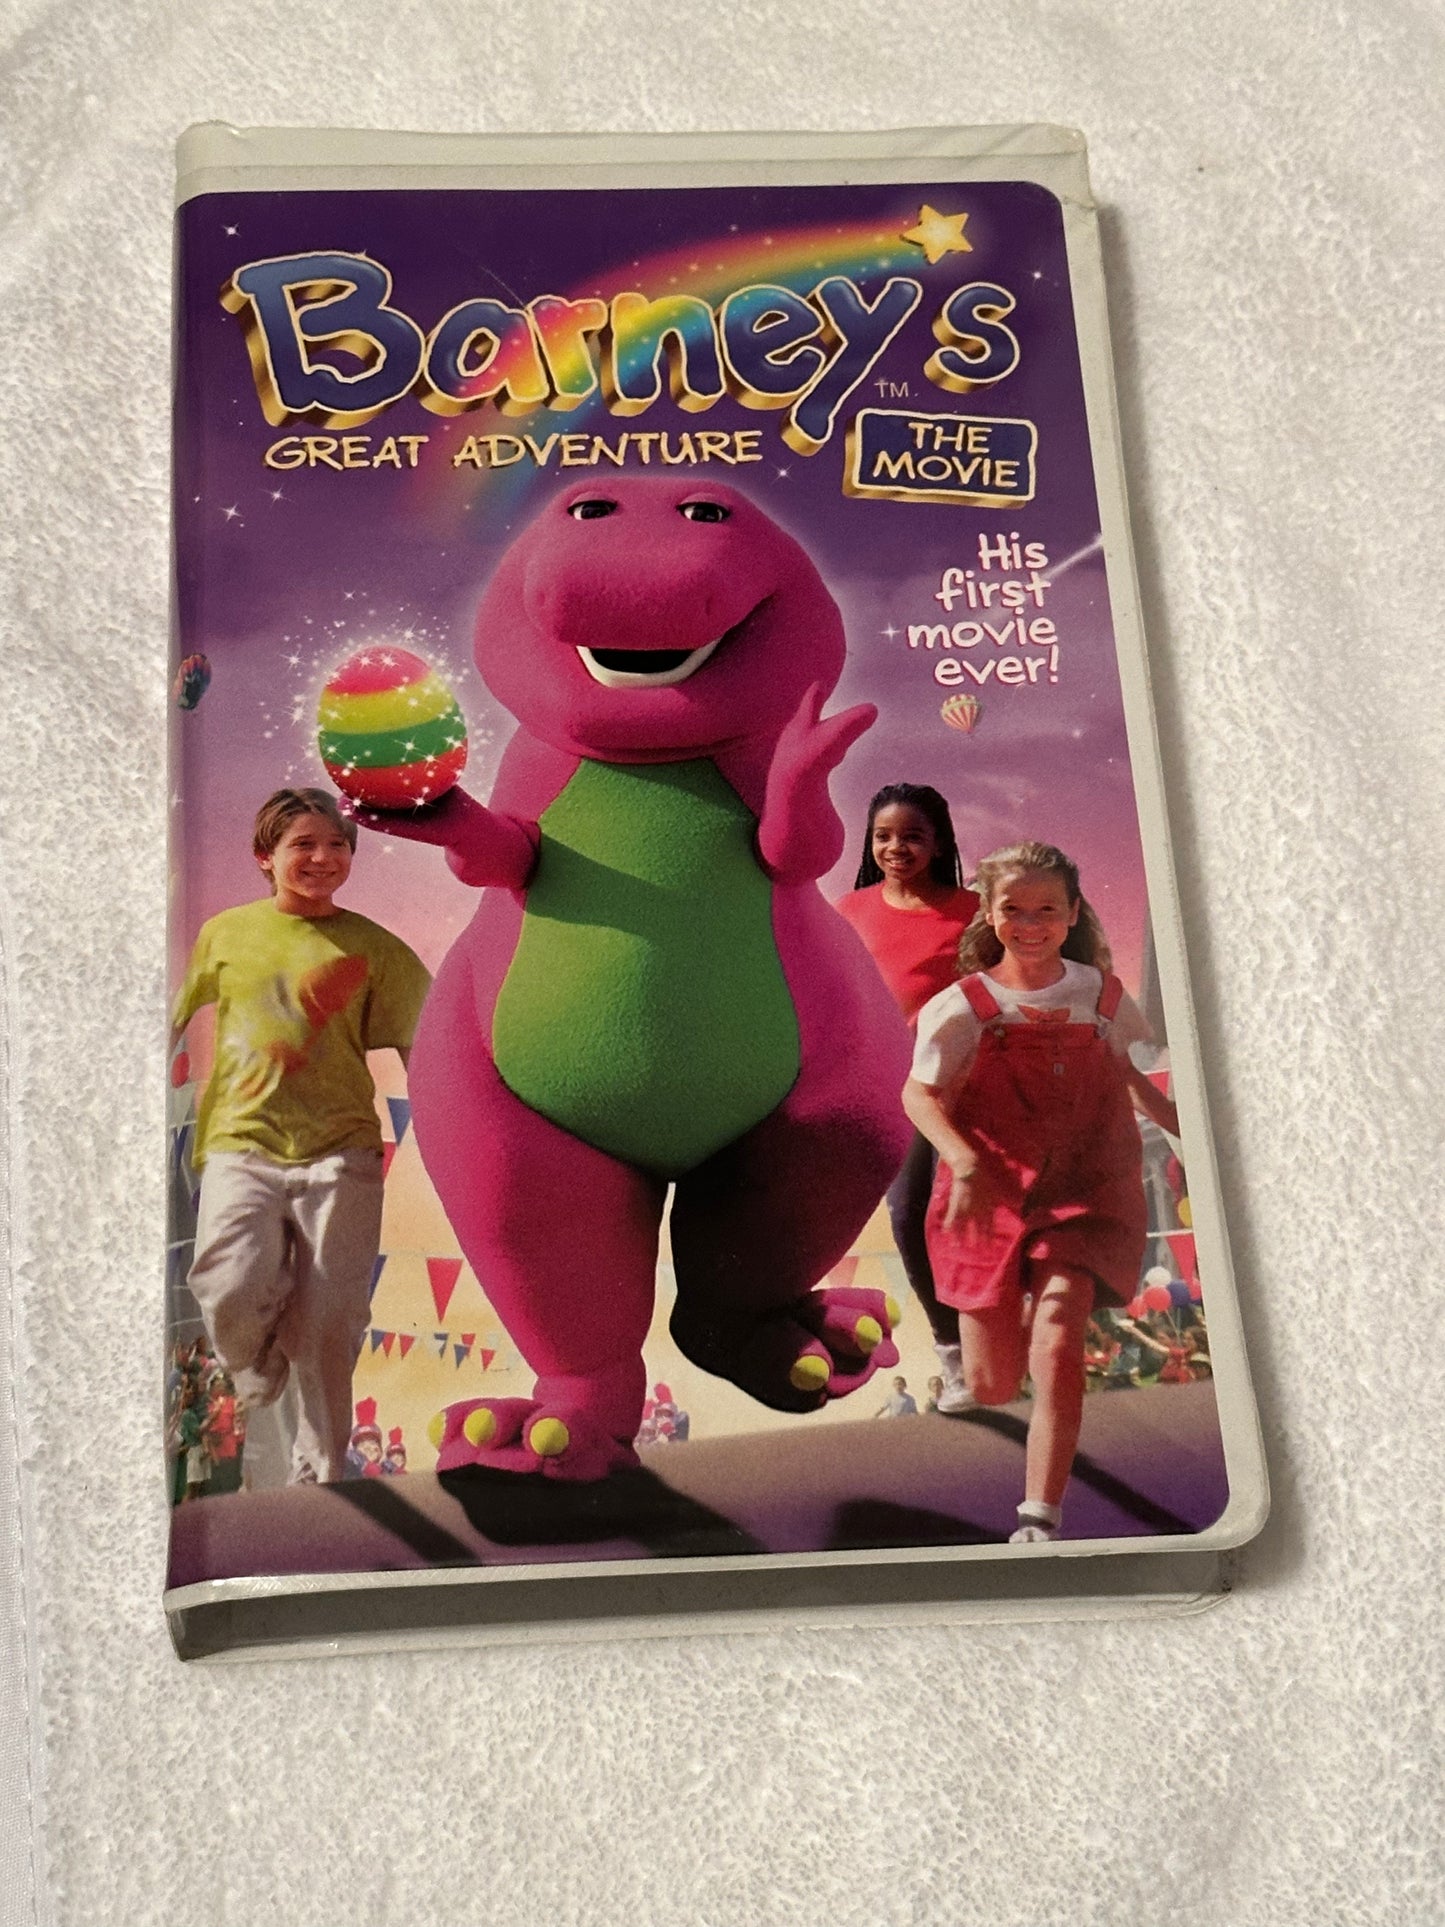 VHS Tape Barnies - Great Adventure, His First Movie Ever